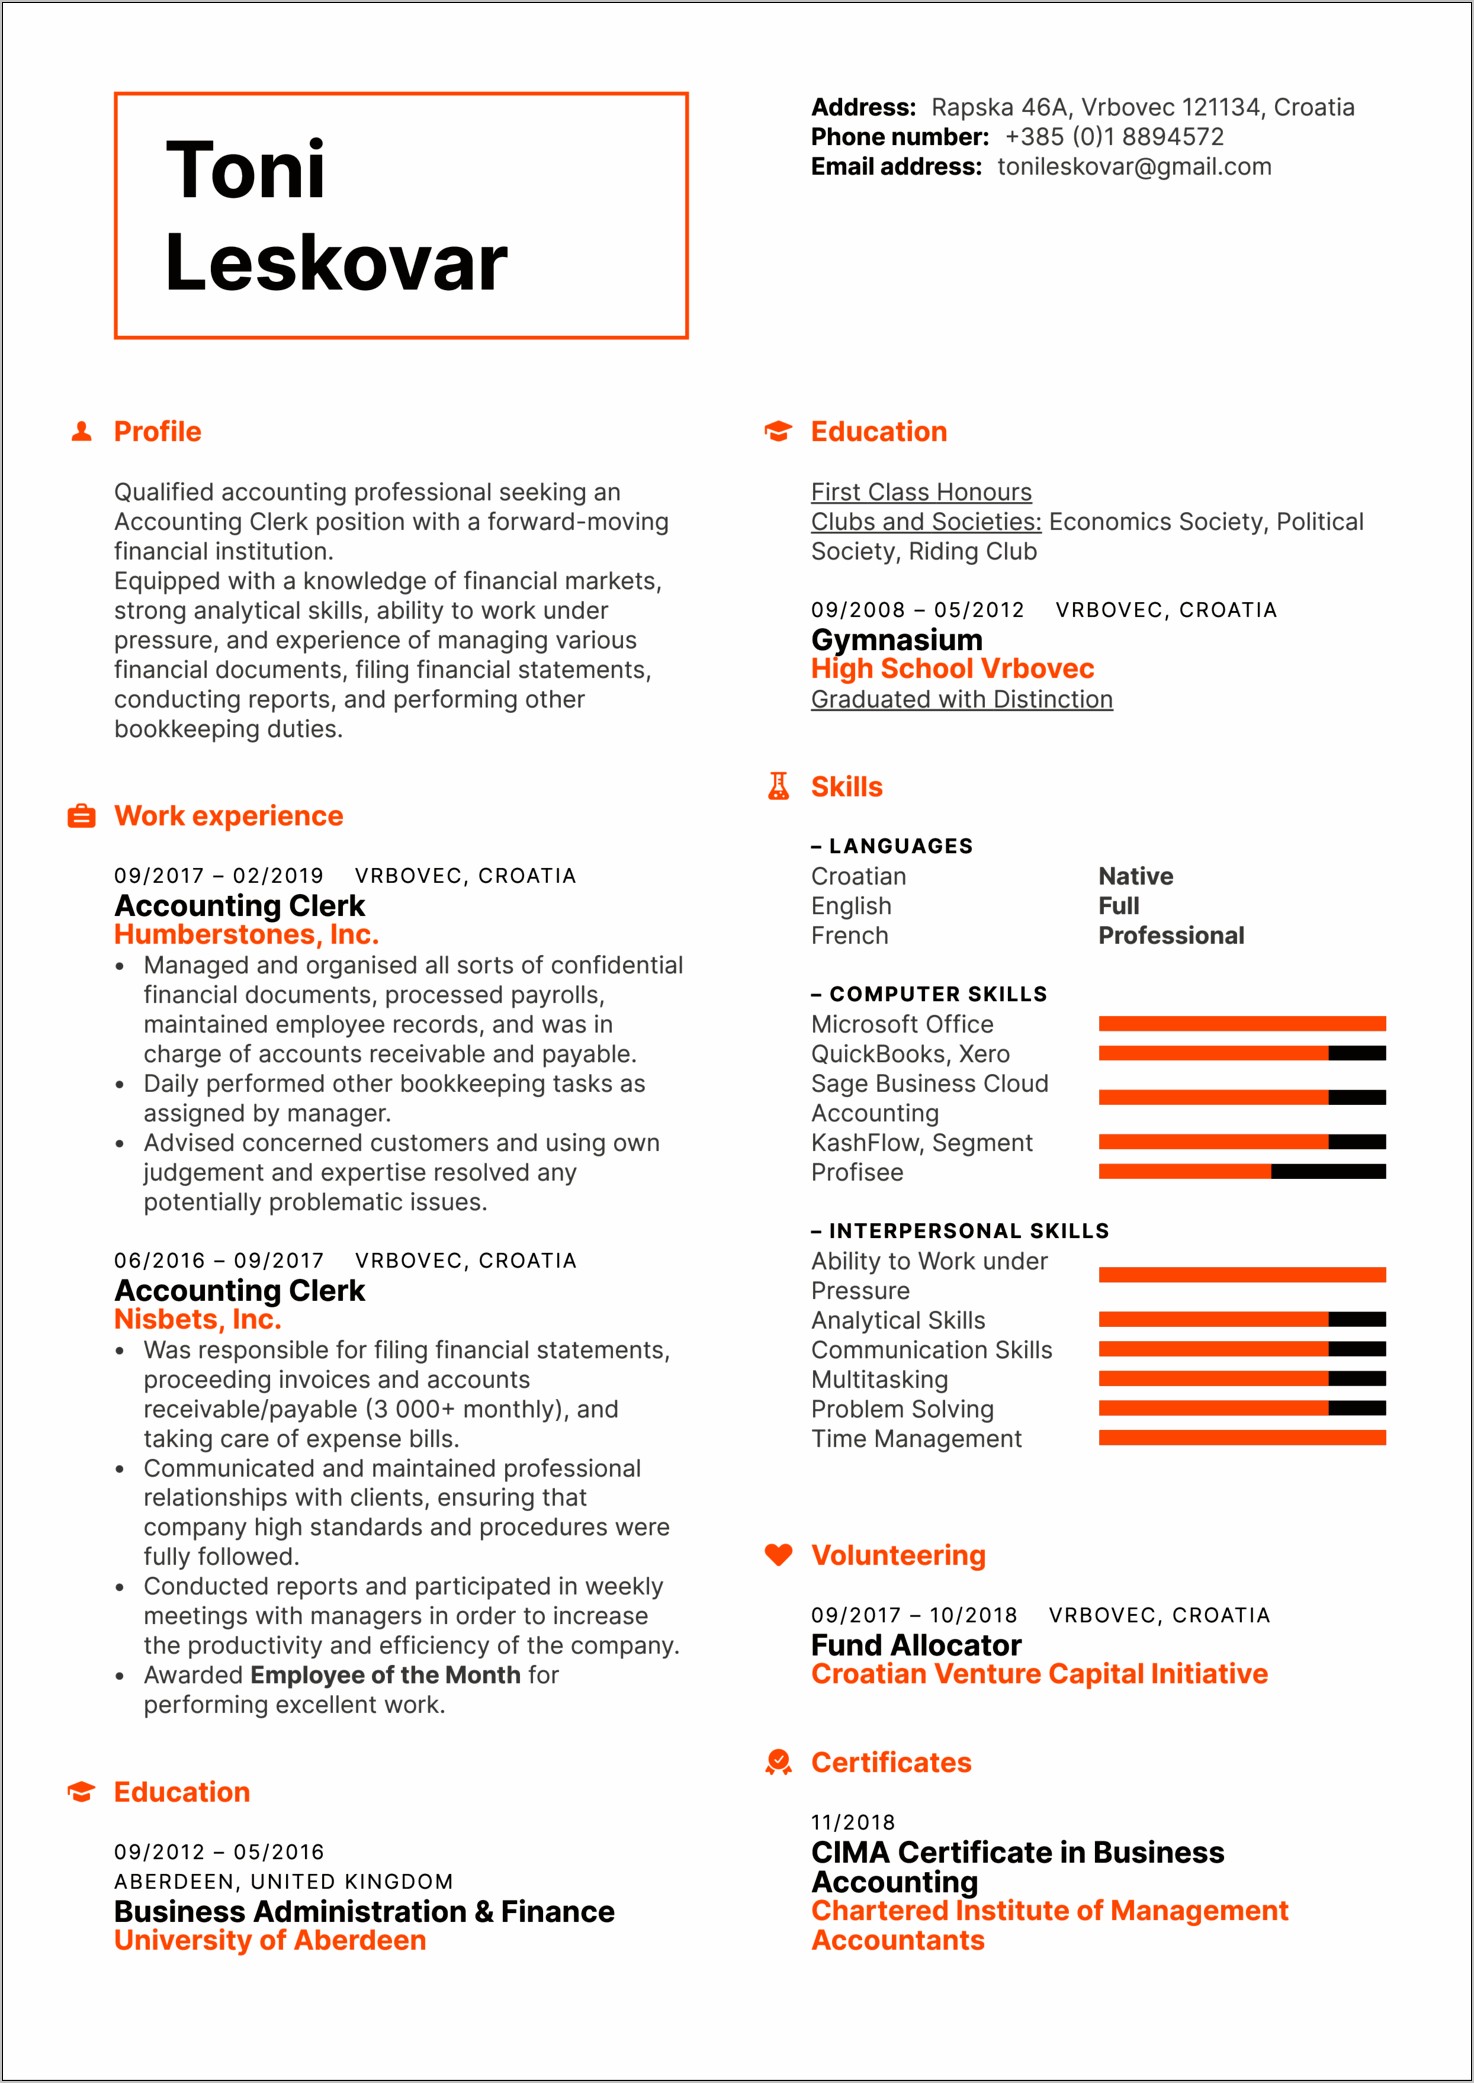 Sample Accounting Resume With Skills Section